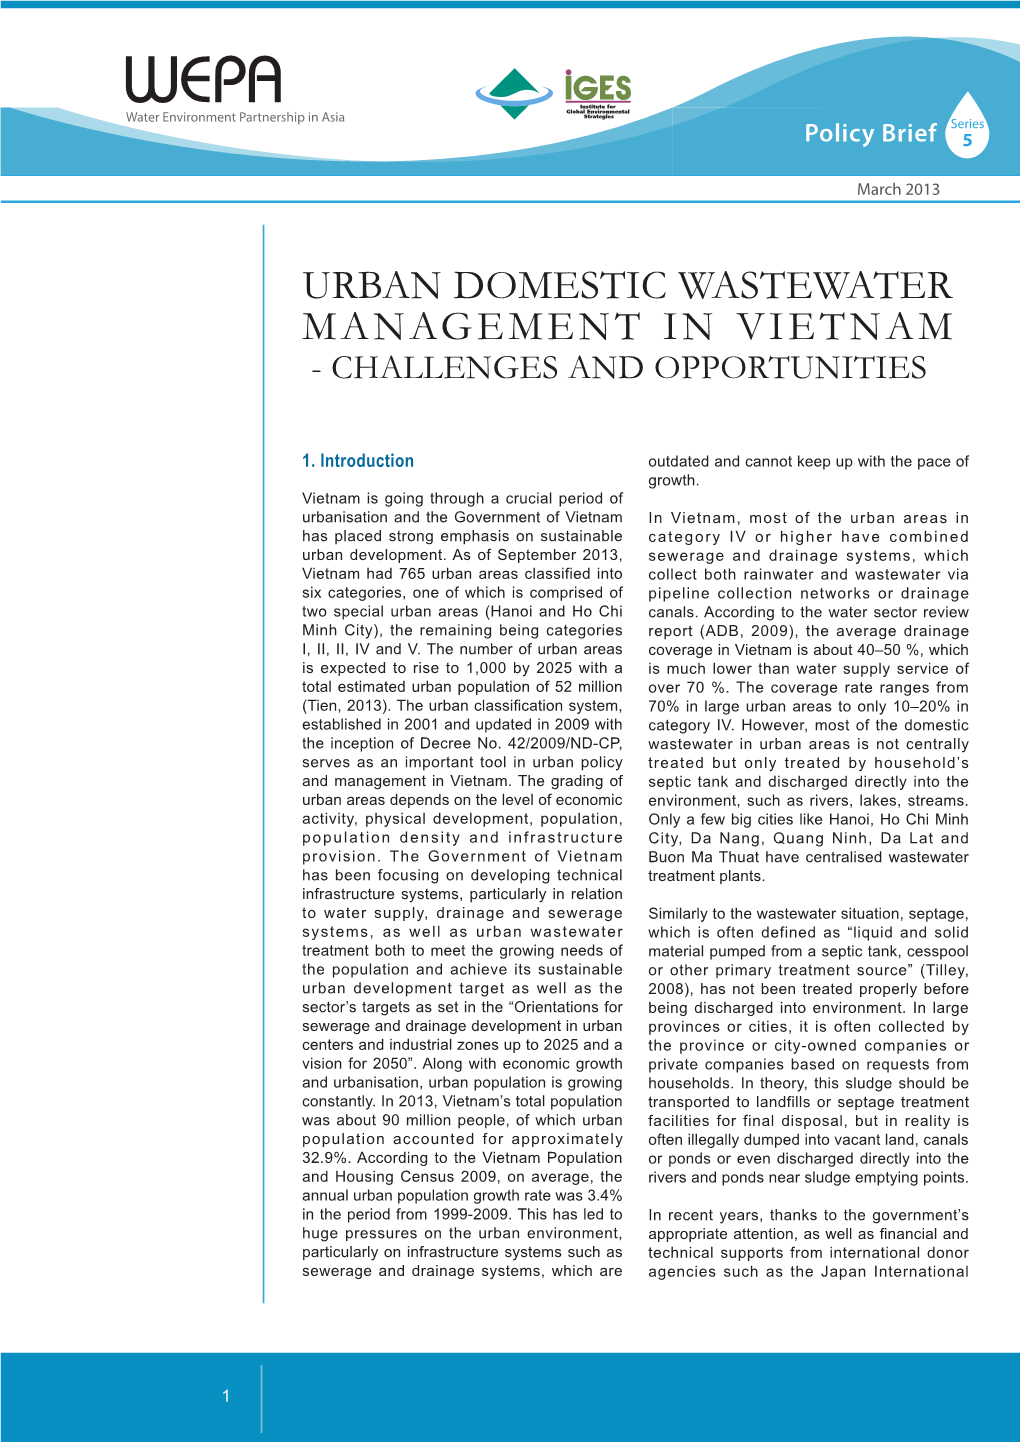 Urban Domestic Wastewater Management in Vietnam - Challenges and Opportunities